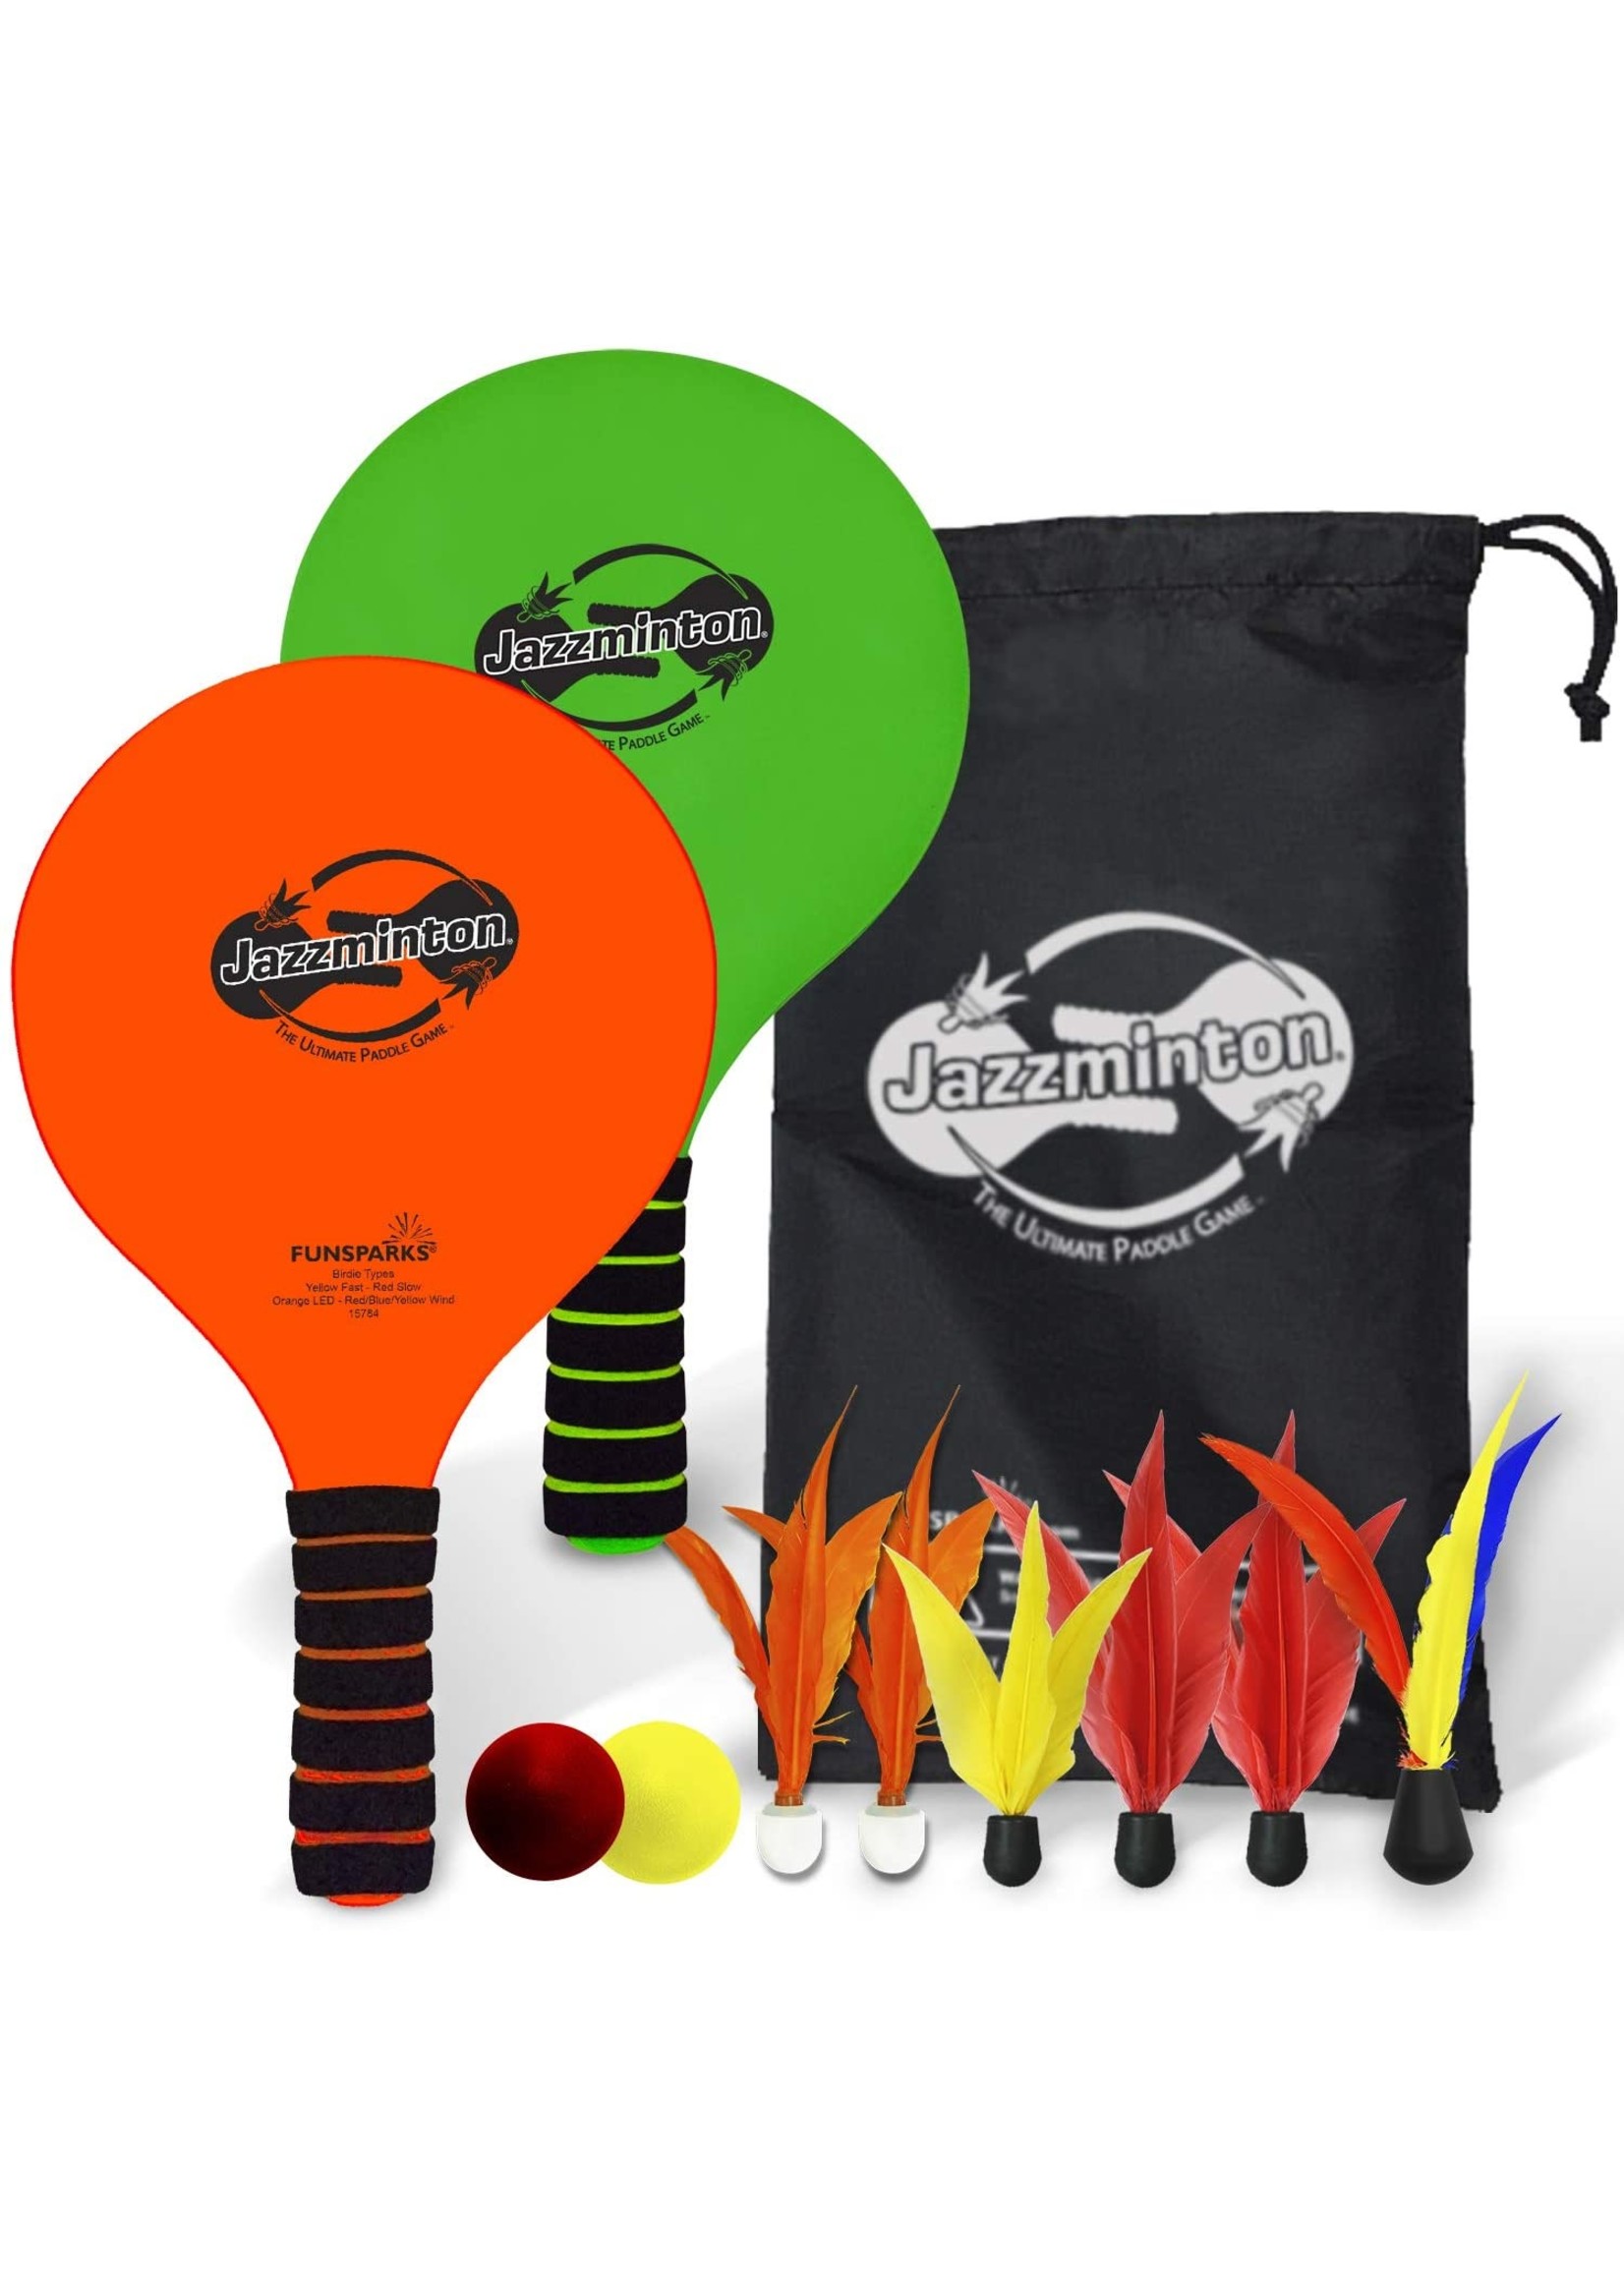 Funsparks Jazzminton Deluxe Pro Pack